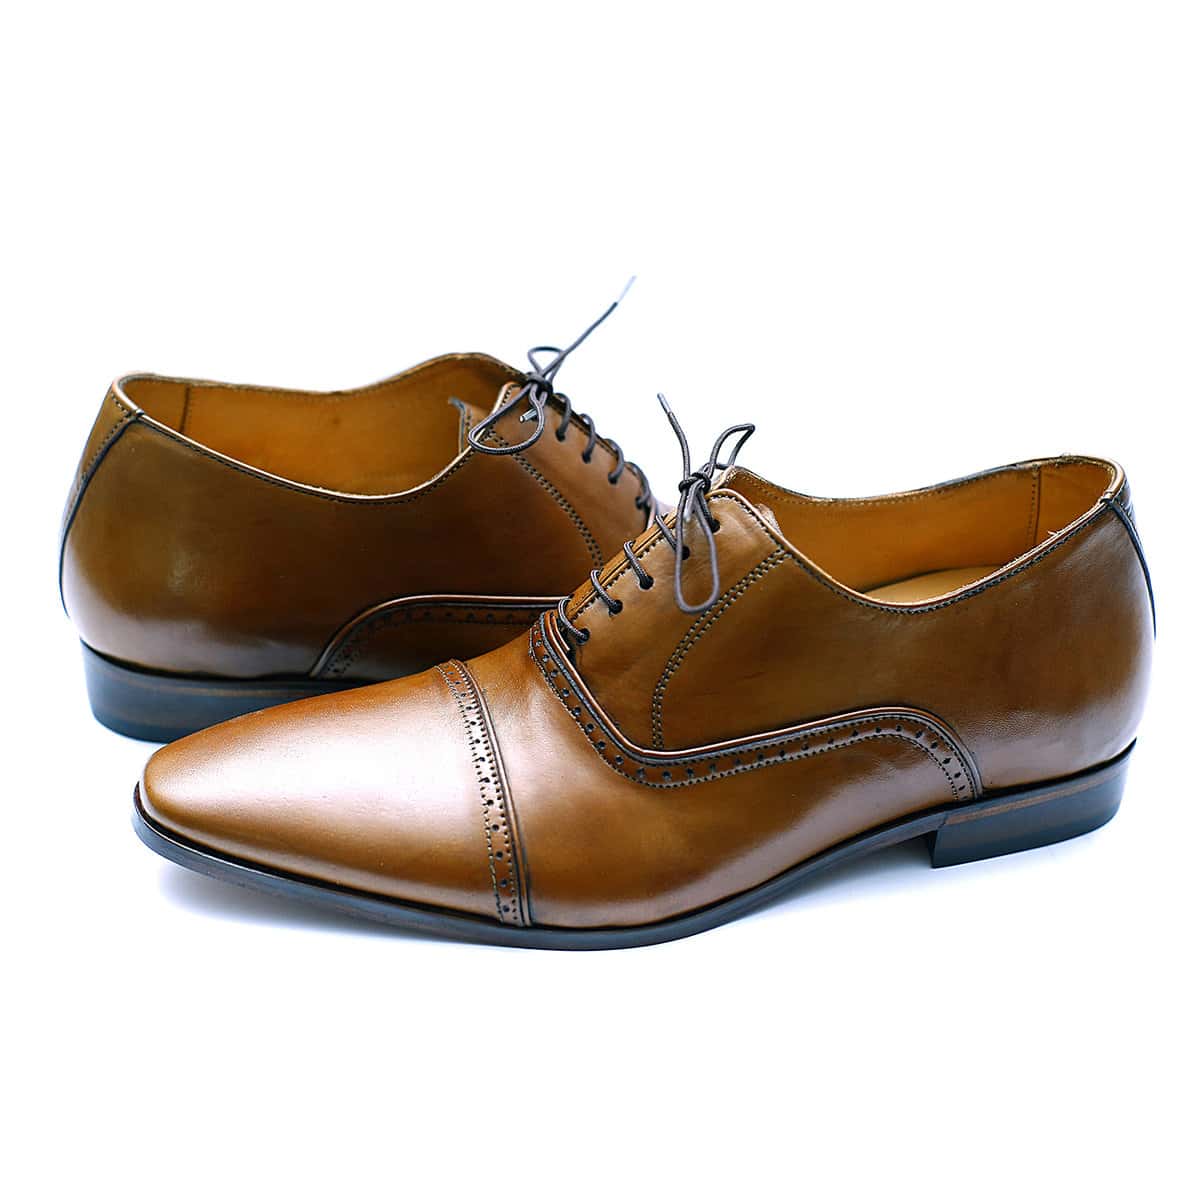 Aft11x – Tan Leather Shoes – 6.5 Cm Taller